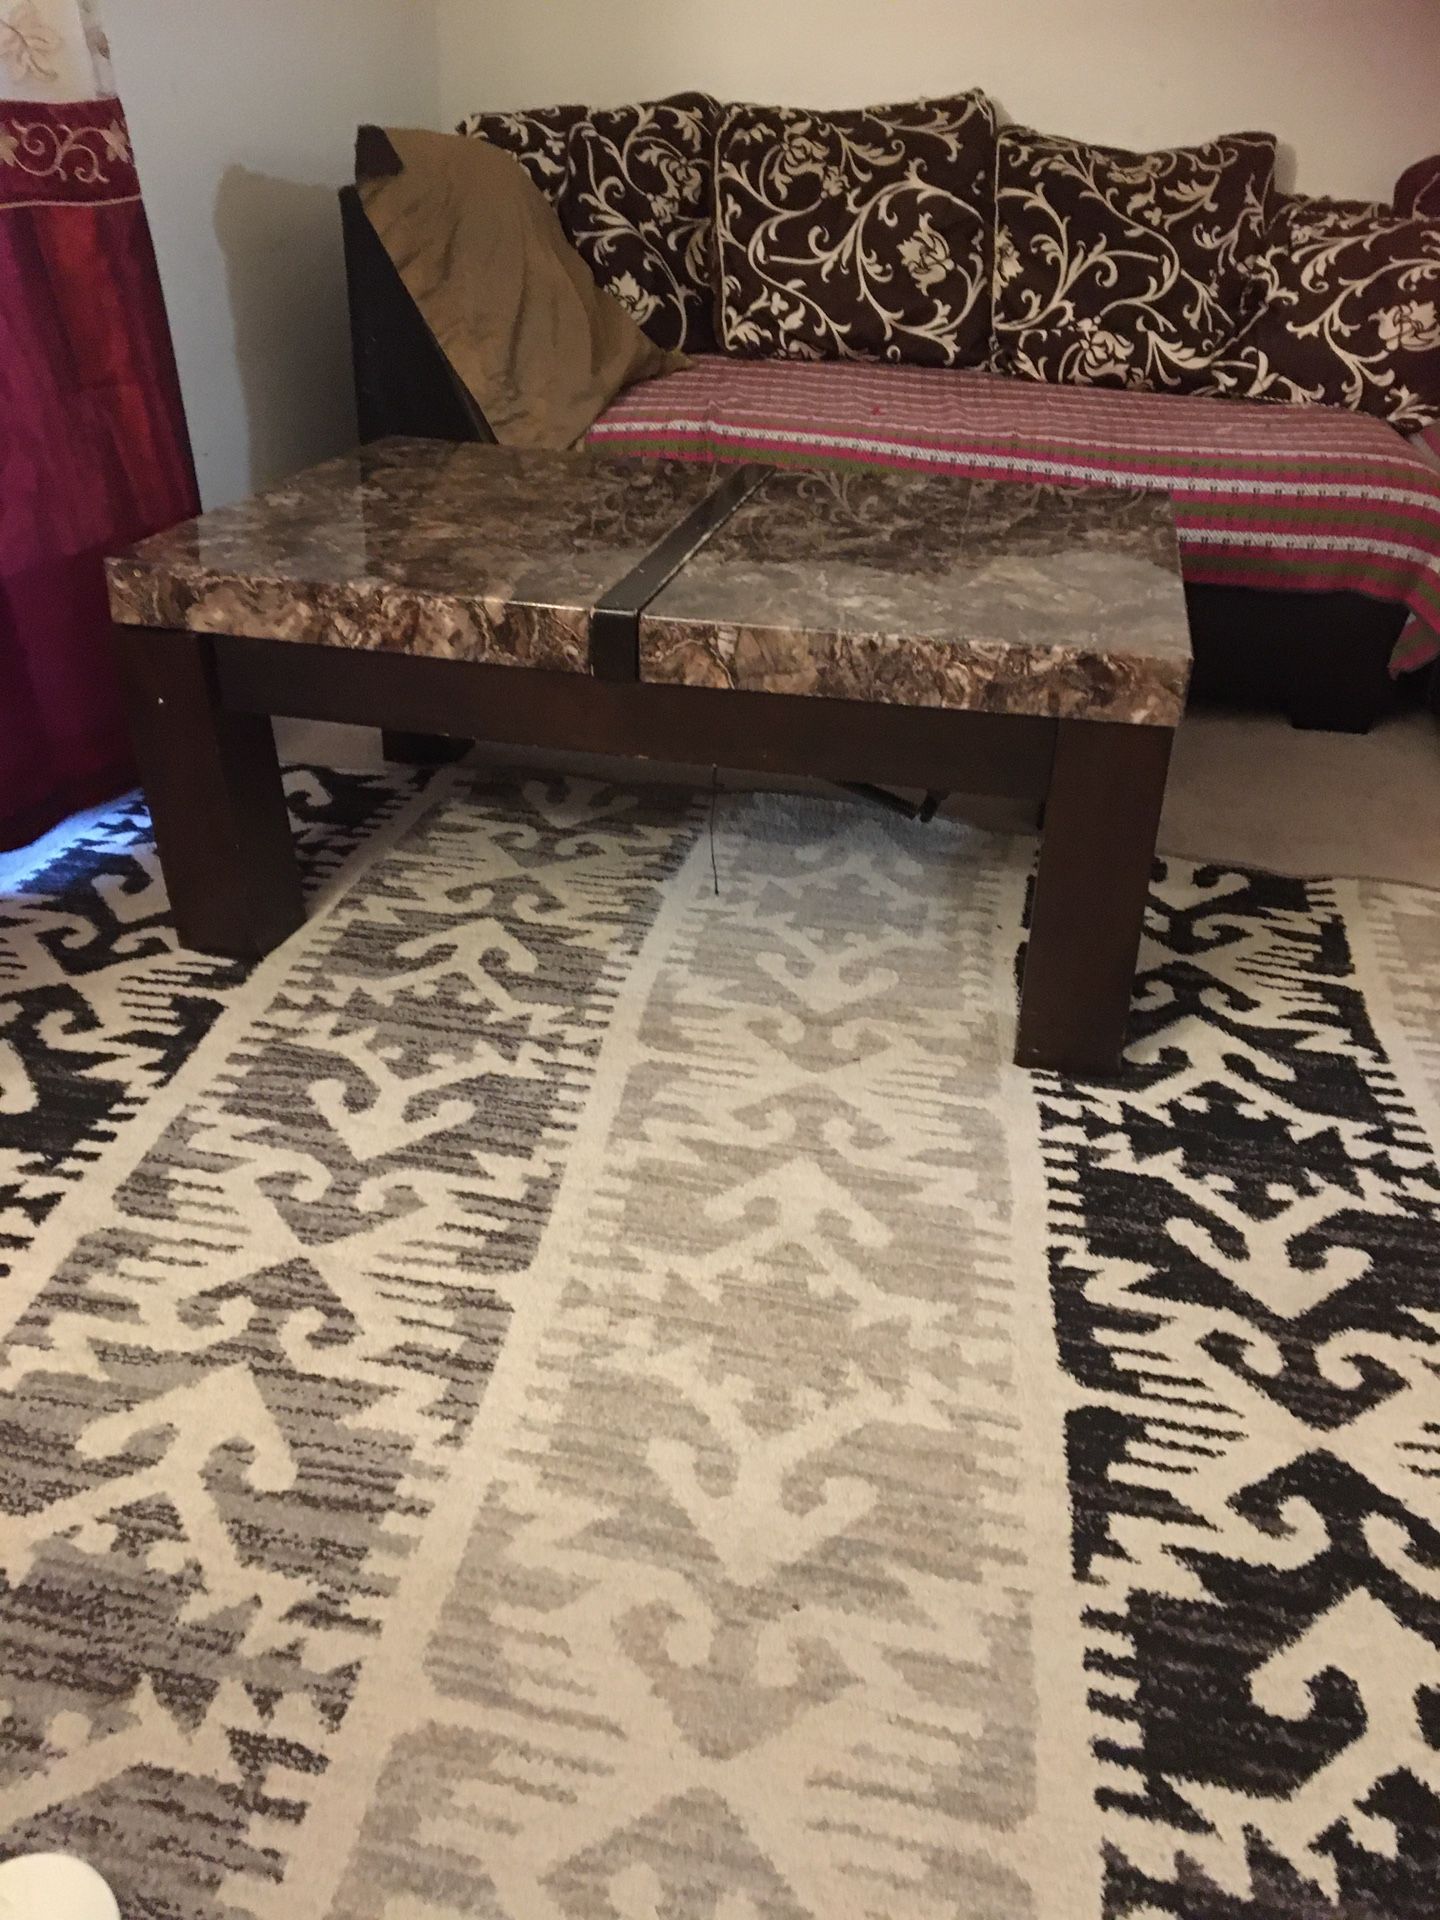 Coffee table (big and lifts up)